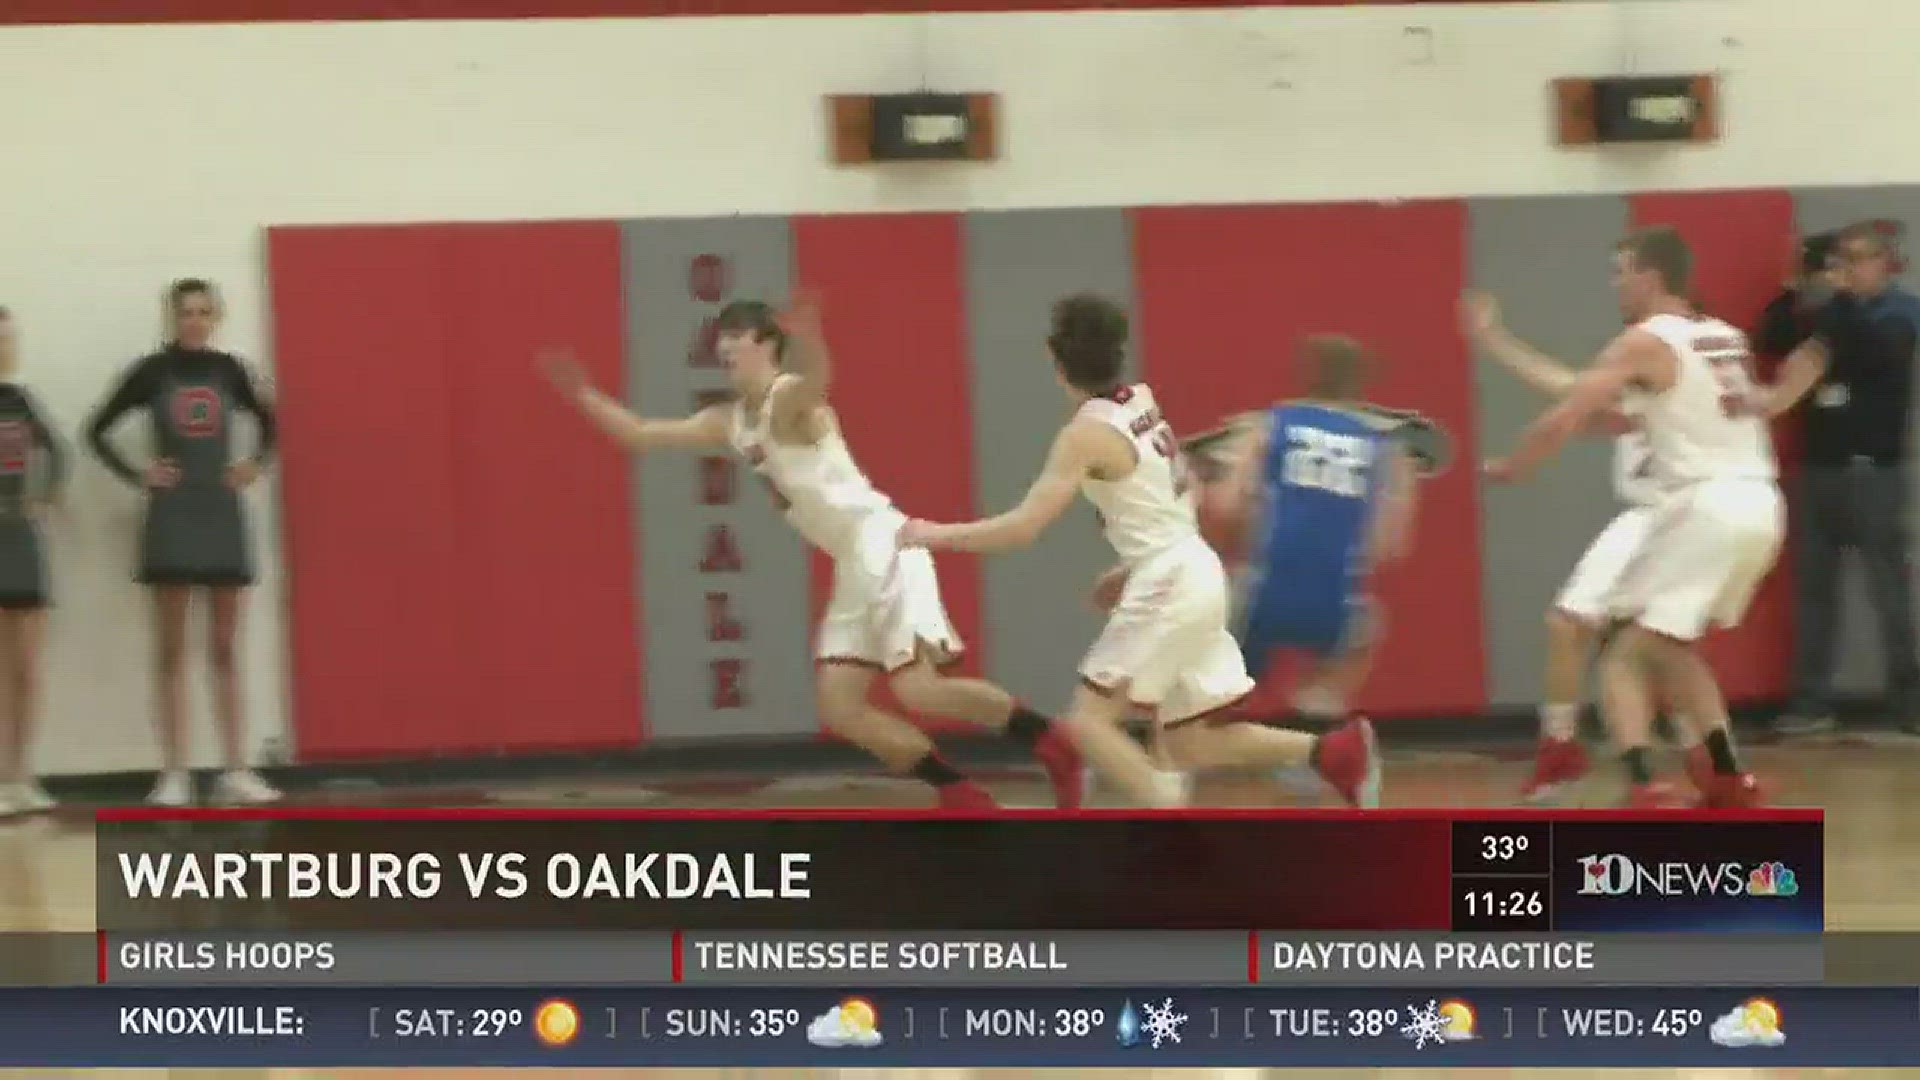 Grace Christian pulled even with Meigs County in the District 3-A standings with a 63-58 win over the Tigers. Oakdale clinched the District 4-A regular season title with a win over Wartburg.